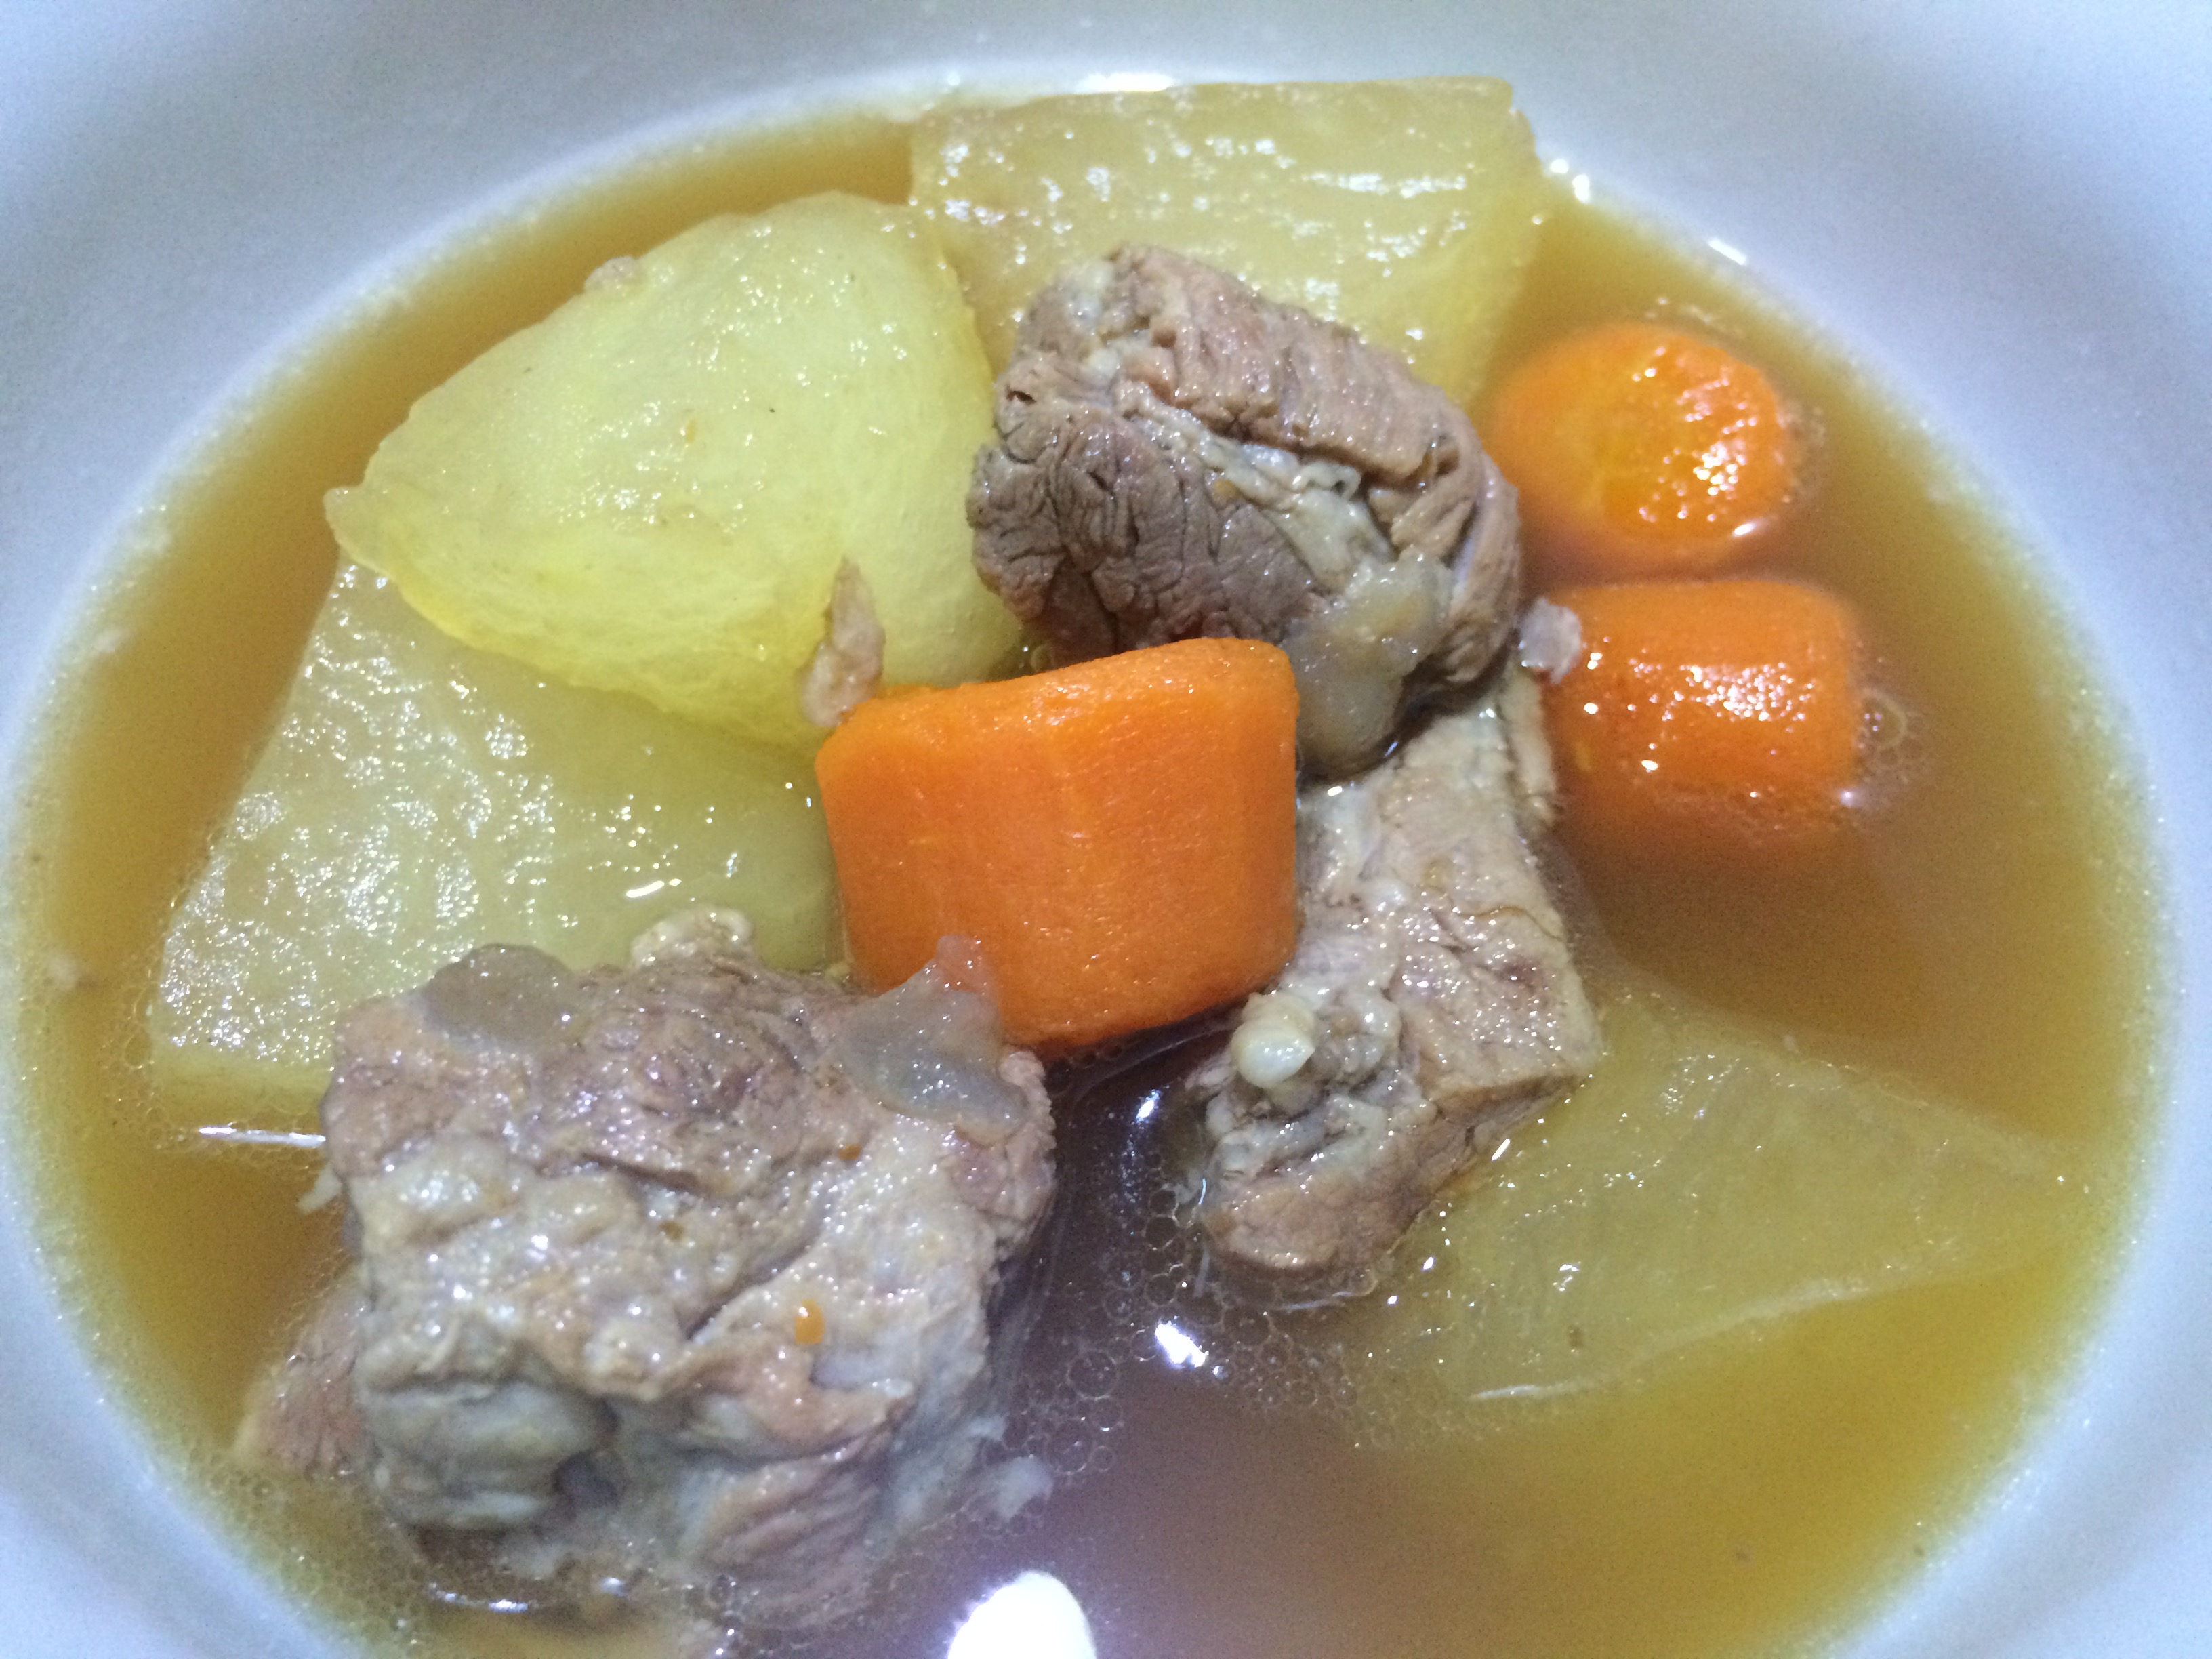 Winter Melon Soup with Pork Ribs and dried oysters